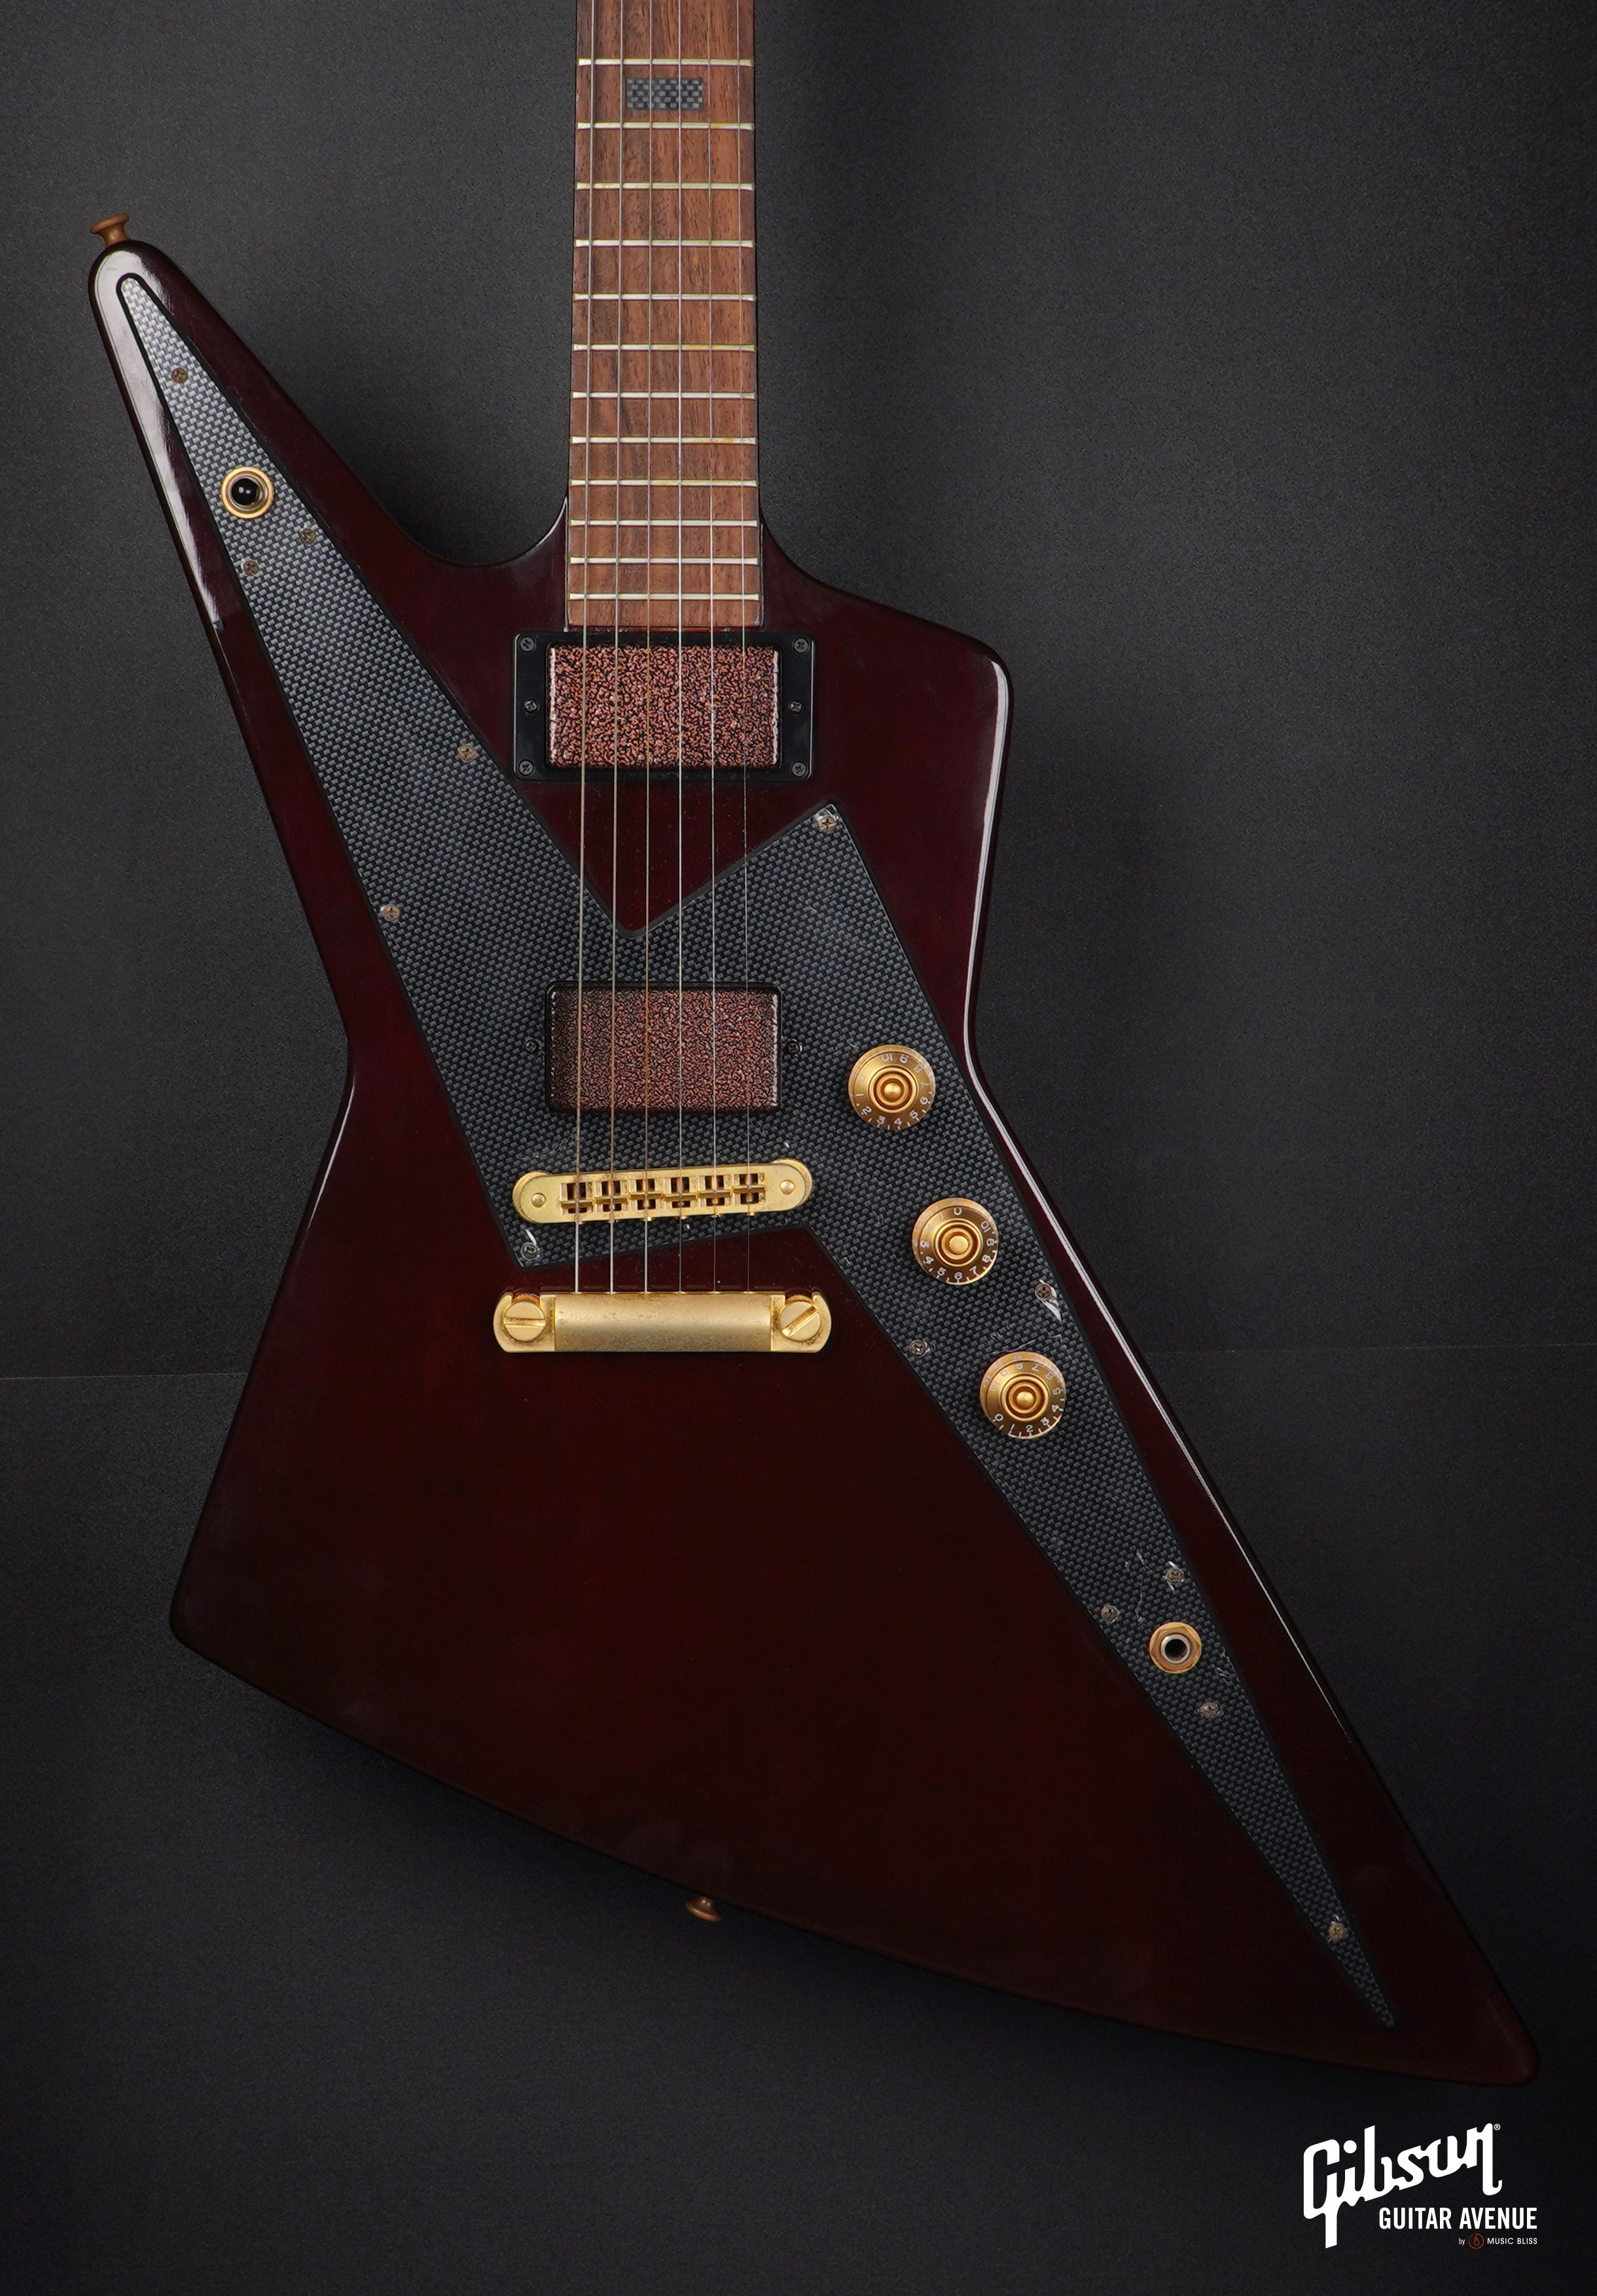 GIBSON REVERSE EXPLORER LIMITED RARE GUITAR OF THE MONTH 2008 ANTIQUE WALNUT [Used]